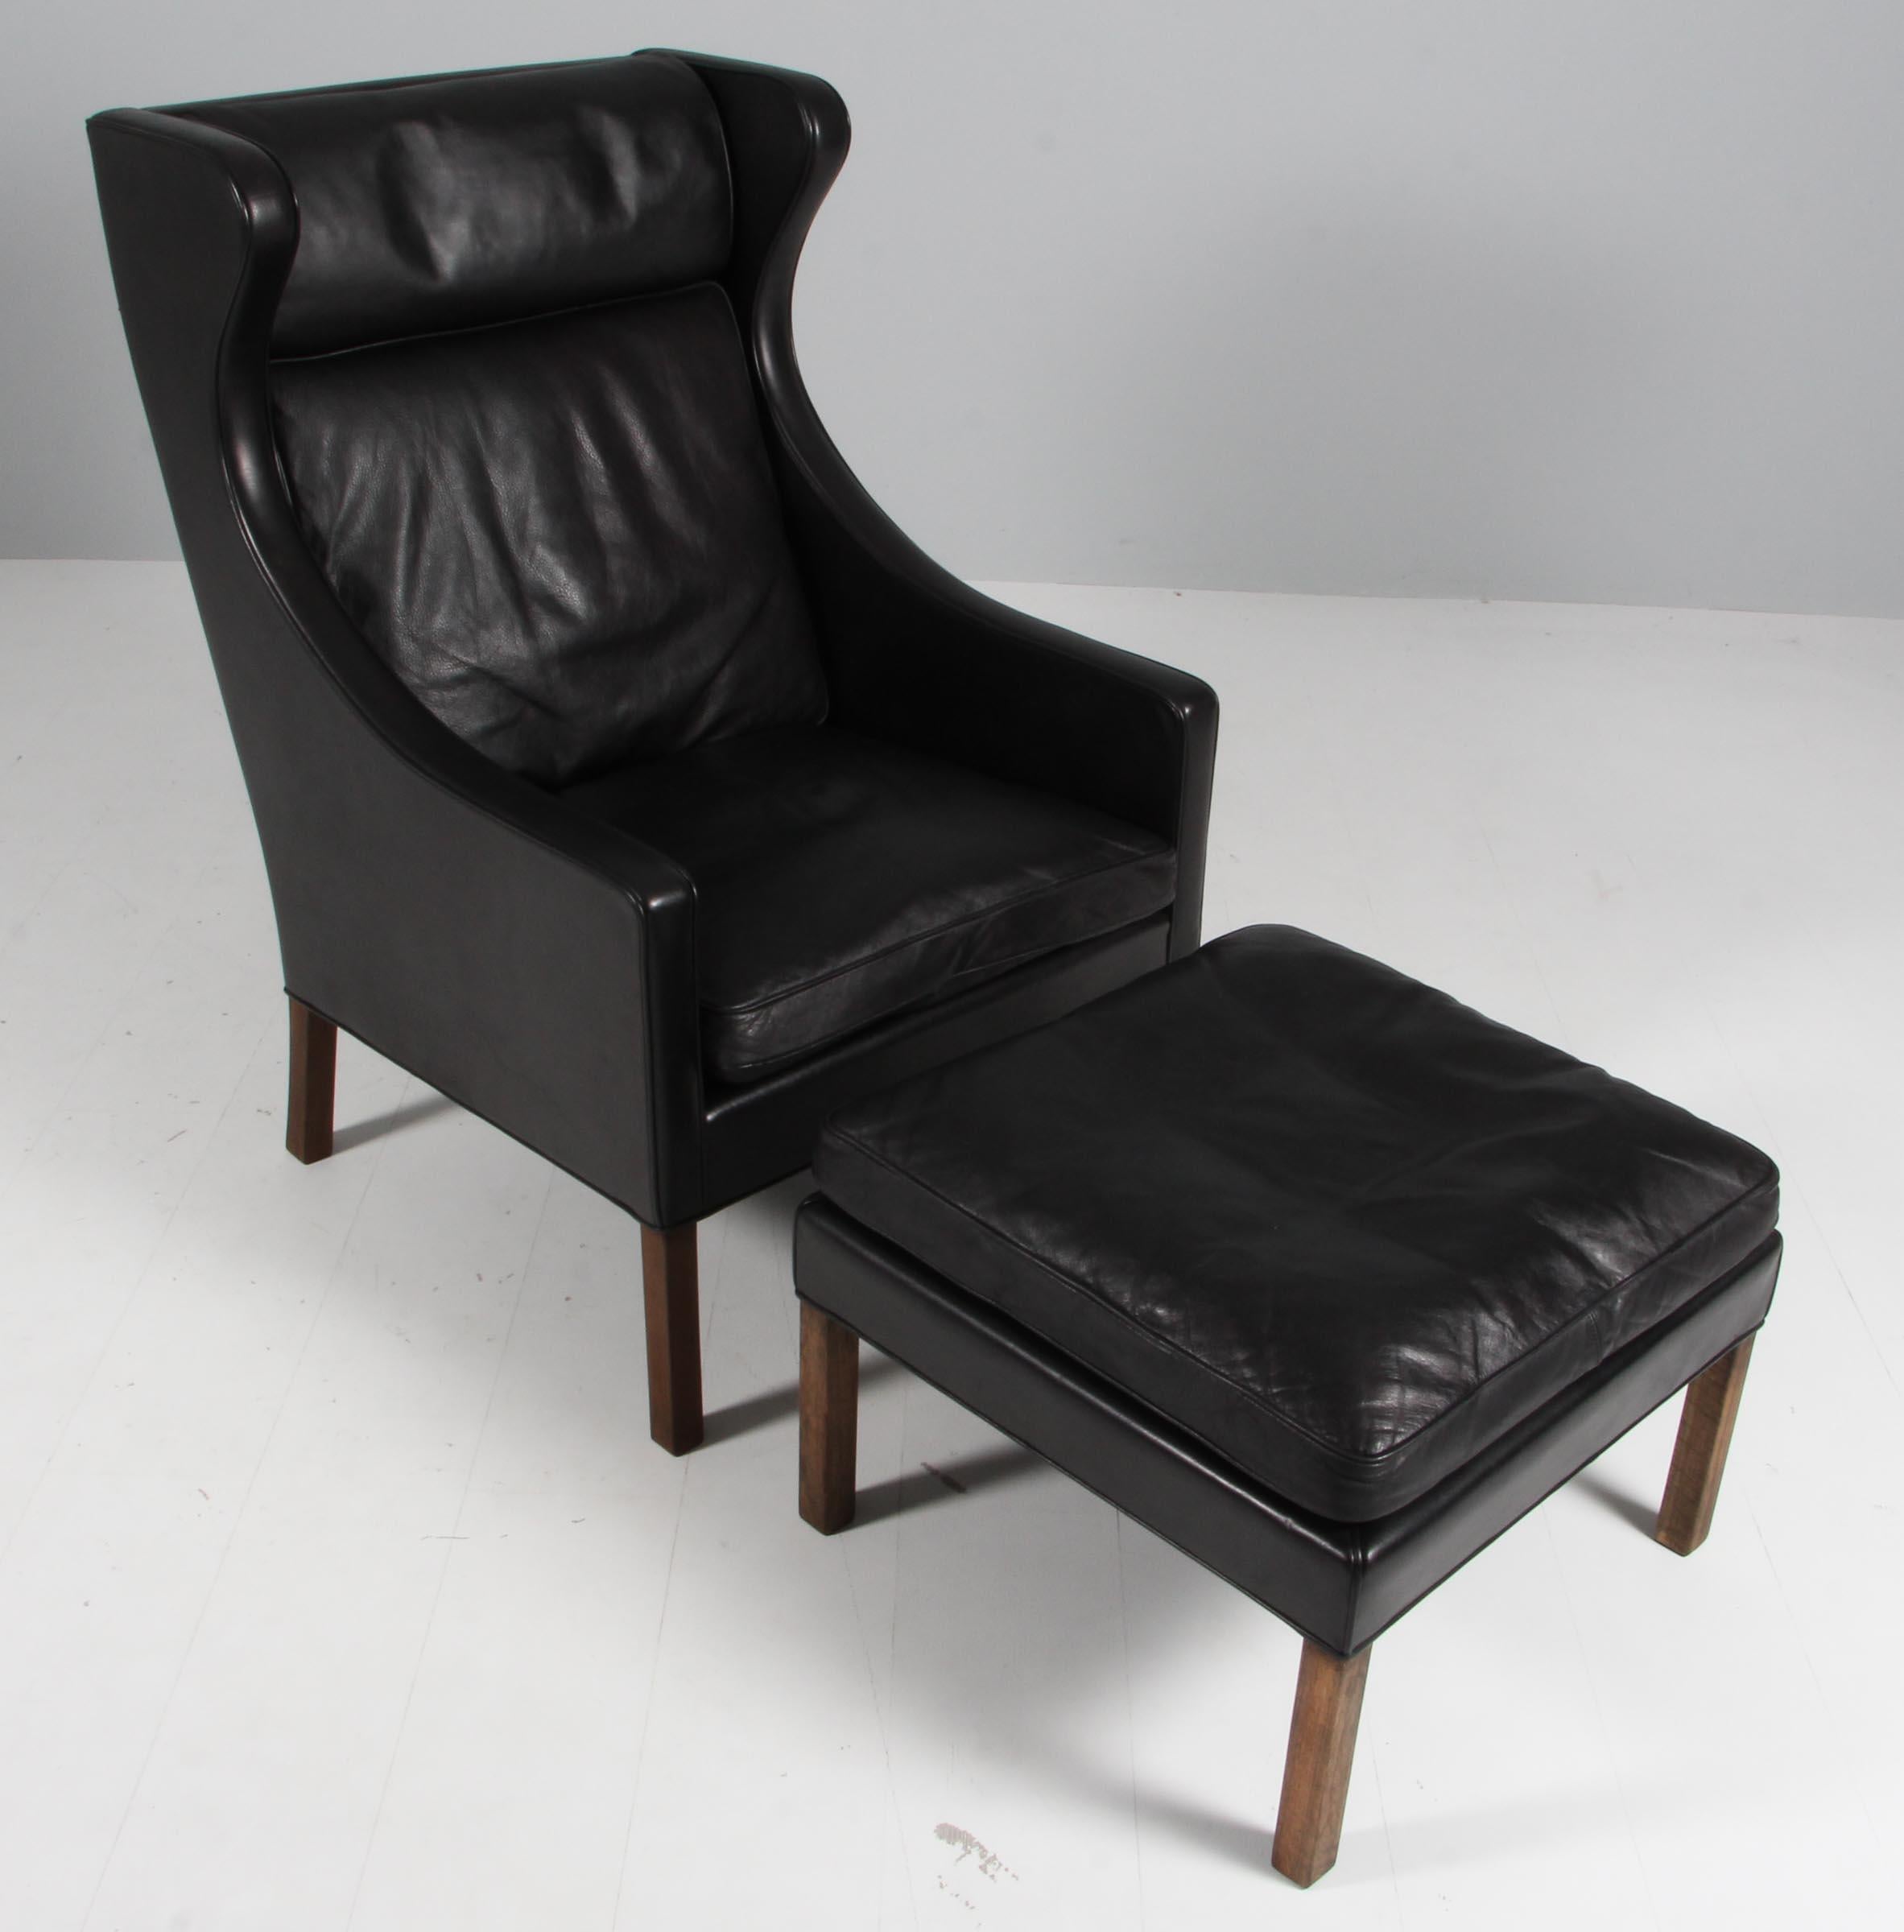 Børge Mogensen wingback chair and ottoman original upholstered with black leather.

Legs of stained wood.

Model 2202 and 2204, made by Fredericia Furniture.